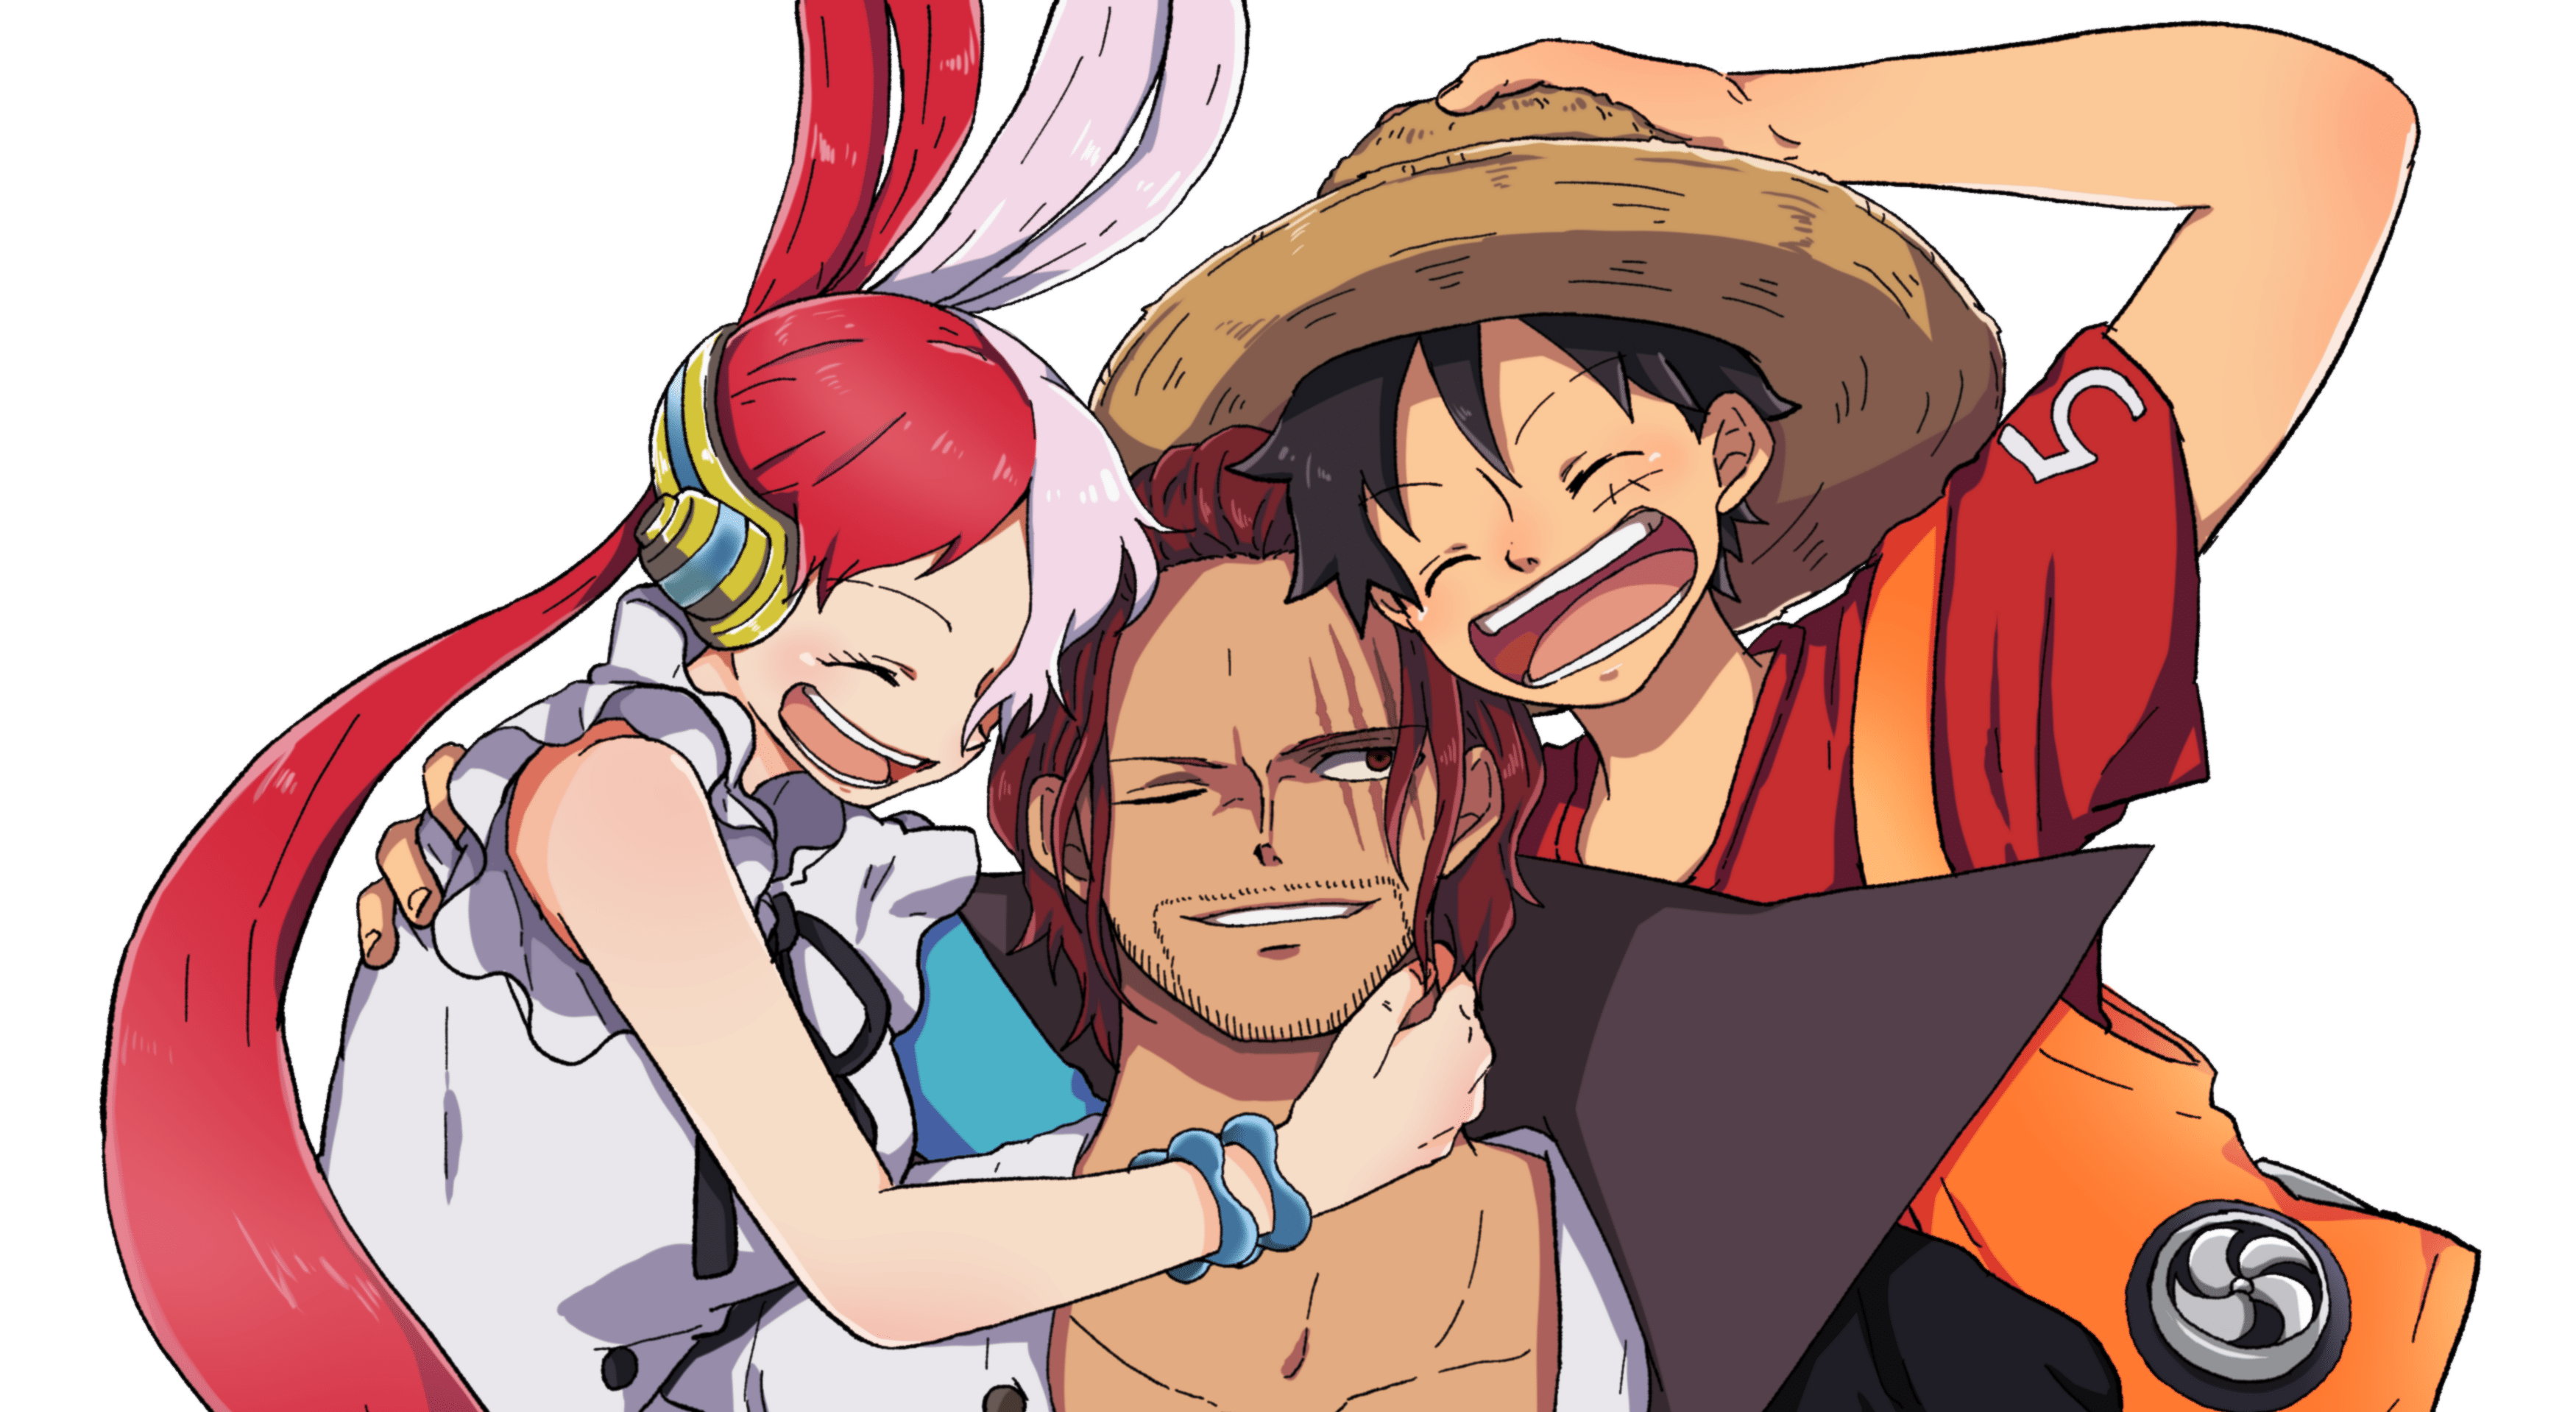 Luffy, Sanji, and Nami from One Piece are all smiling and hugging each other. - One Piece